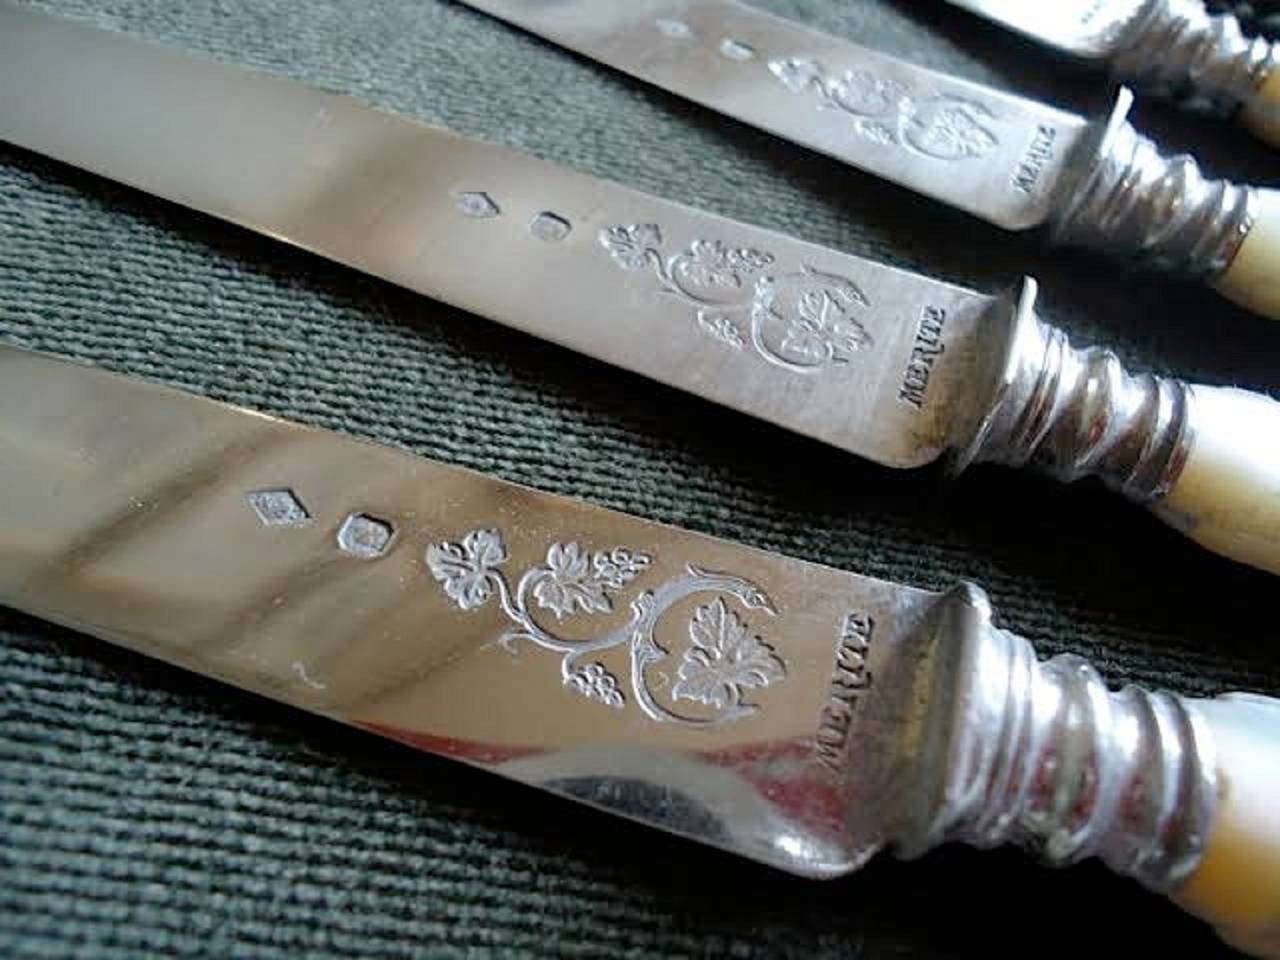 34 silver and mother-of-pearl French fruit or tea knives in original box. 17 blades are incised with a floral pattern above the silver collar and 17 blades are plain. The mother-of-pearl handles are identical for all 34 knives. 

The silver is